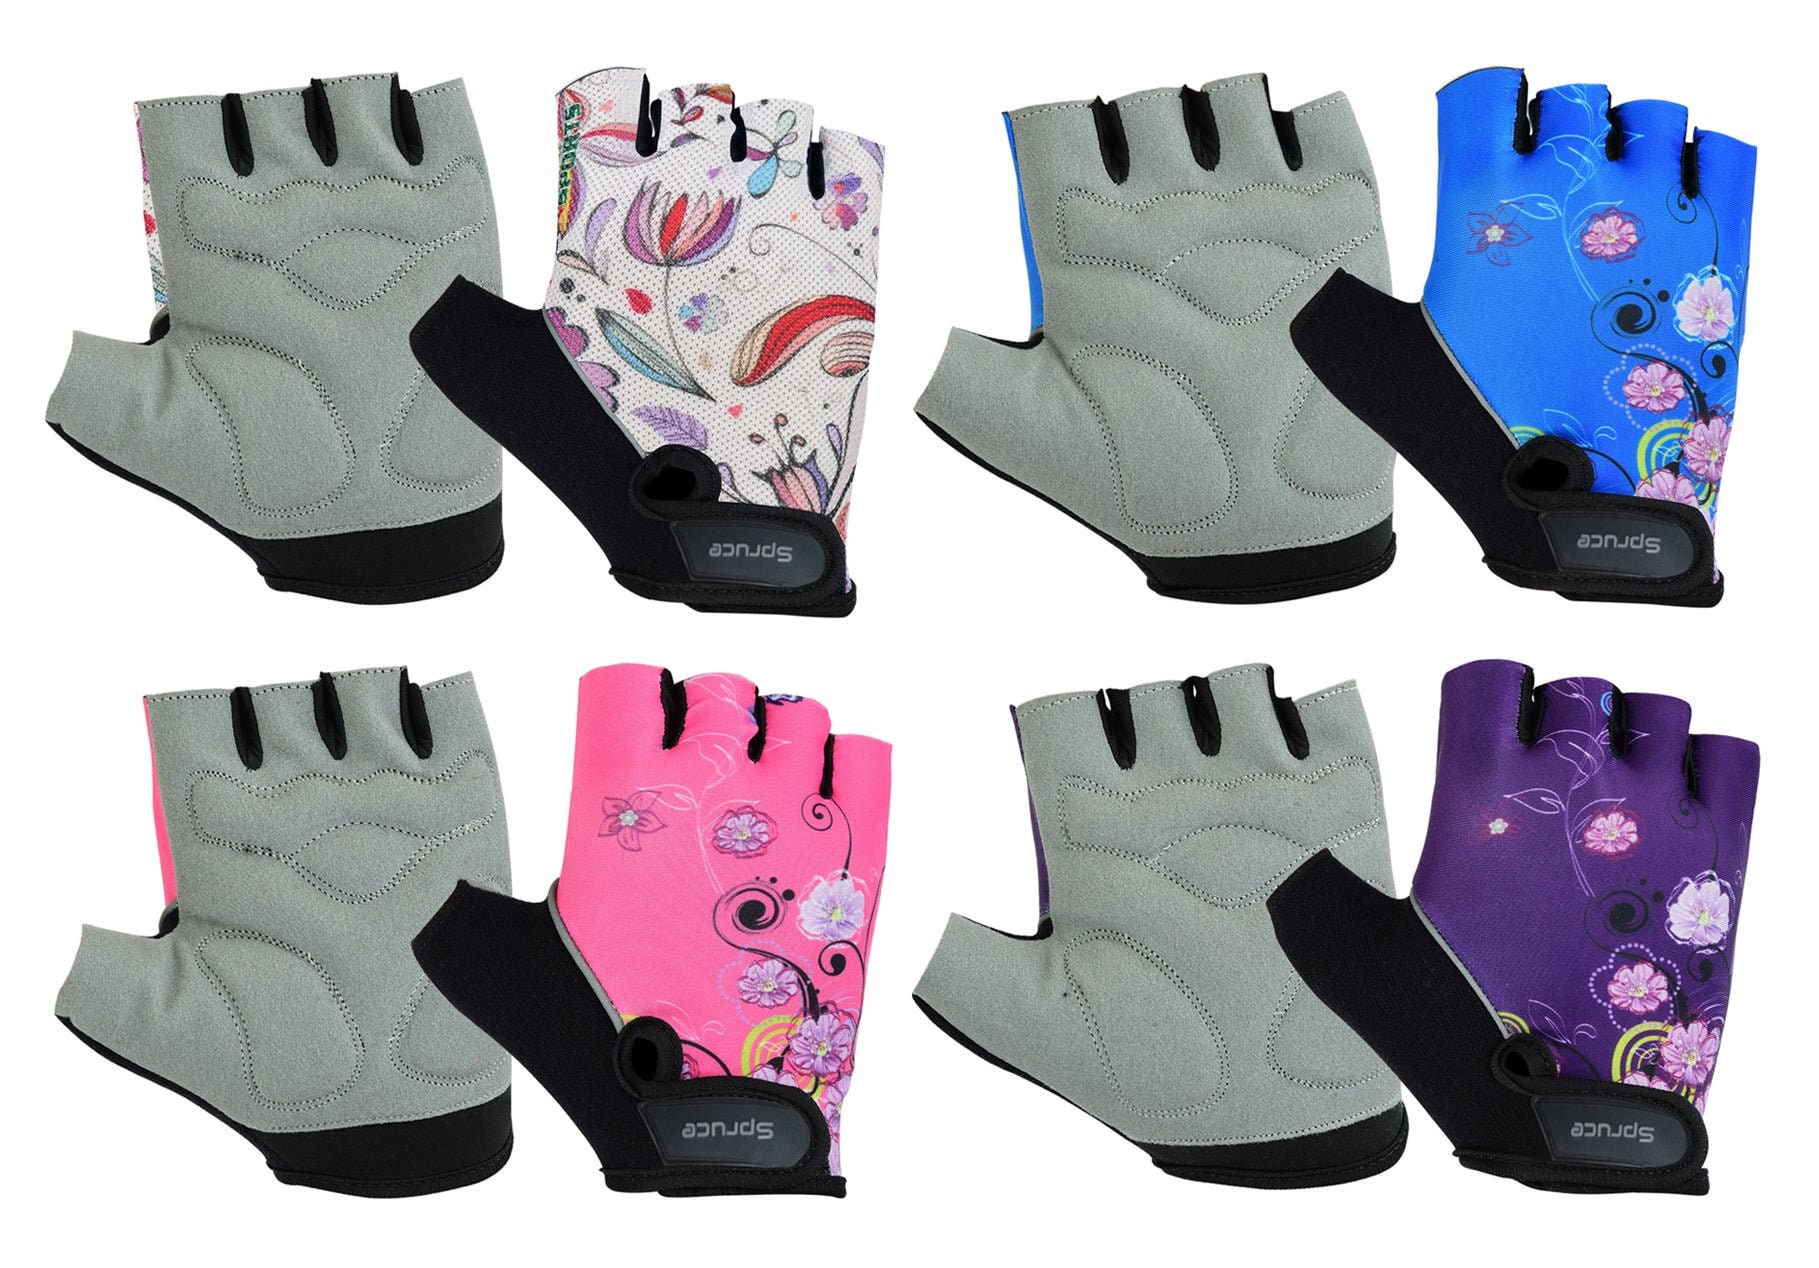 Ladies Fingerless Leather Gloves With Gel Palm - SKU 8232-00-UN